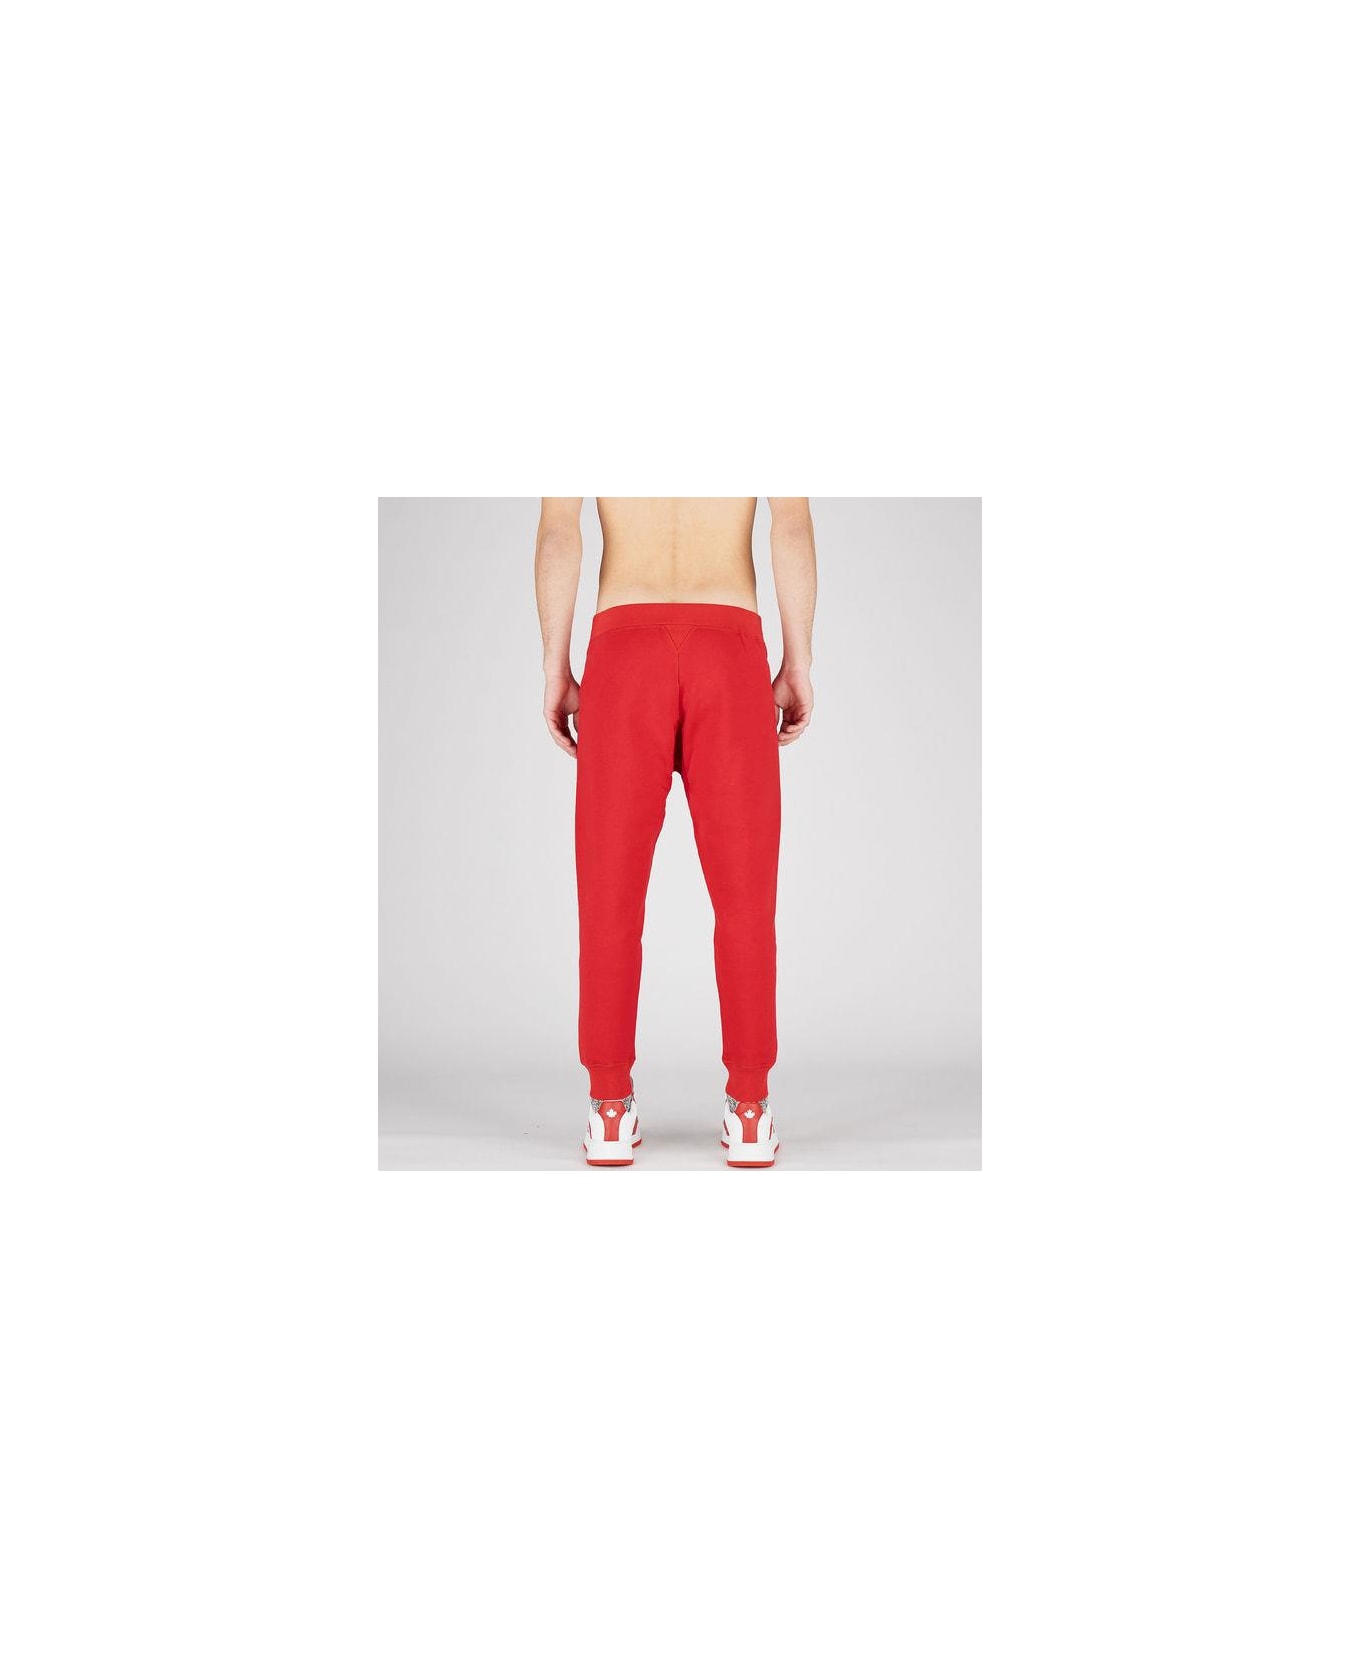 Dsquared2 Pants - Dark red